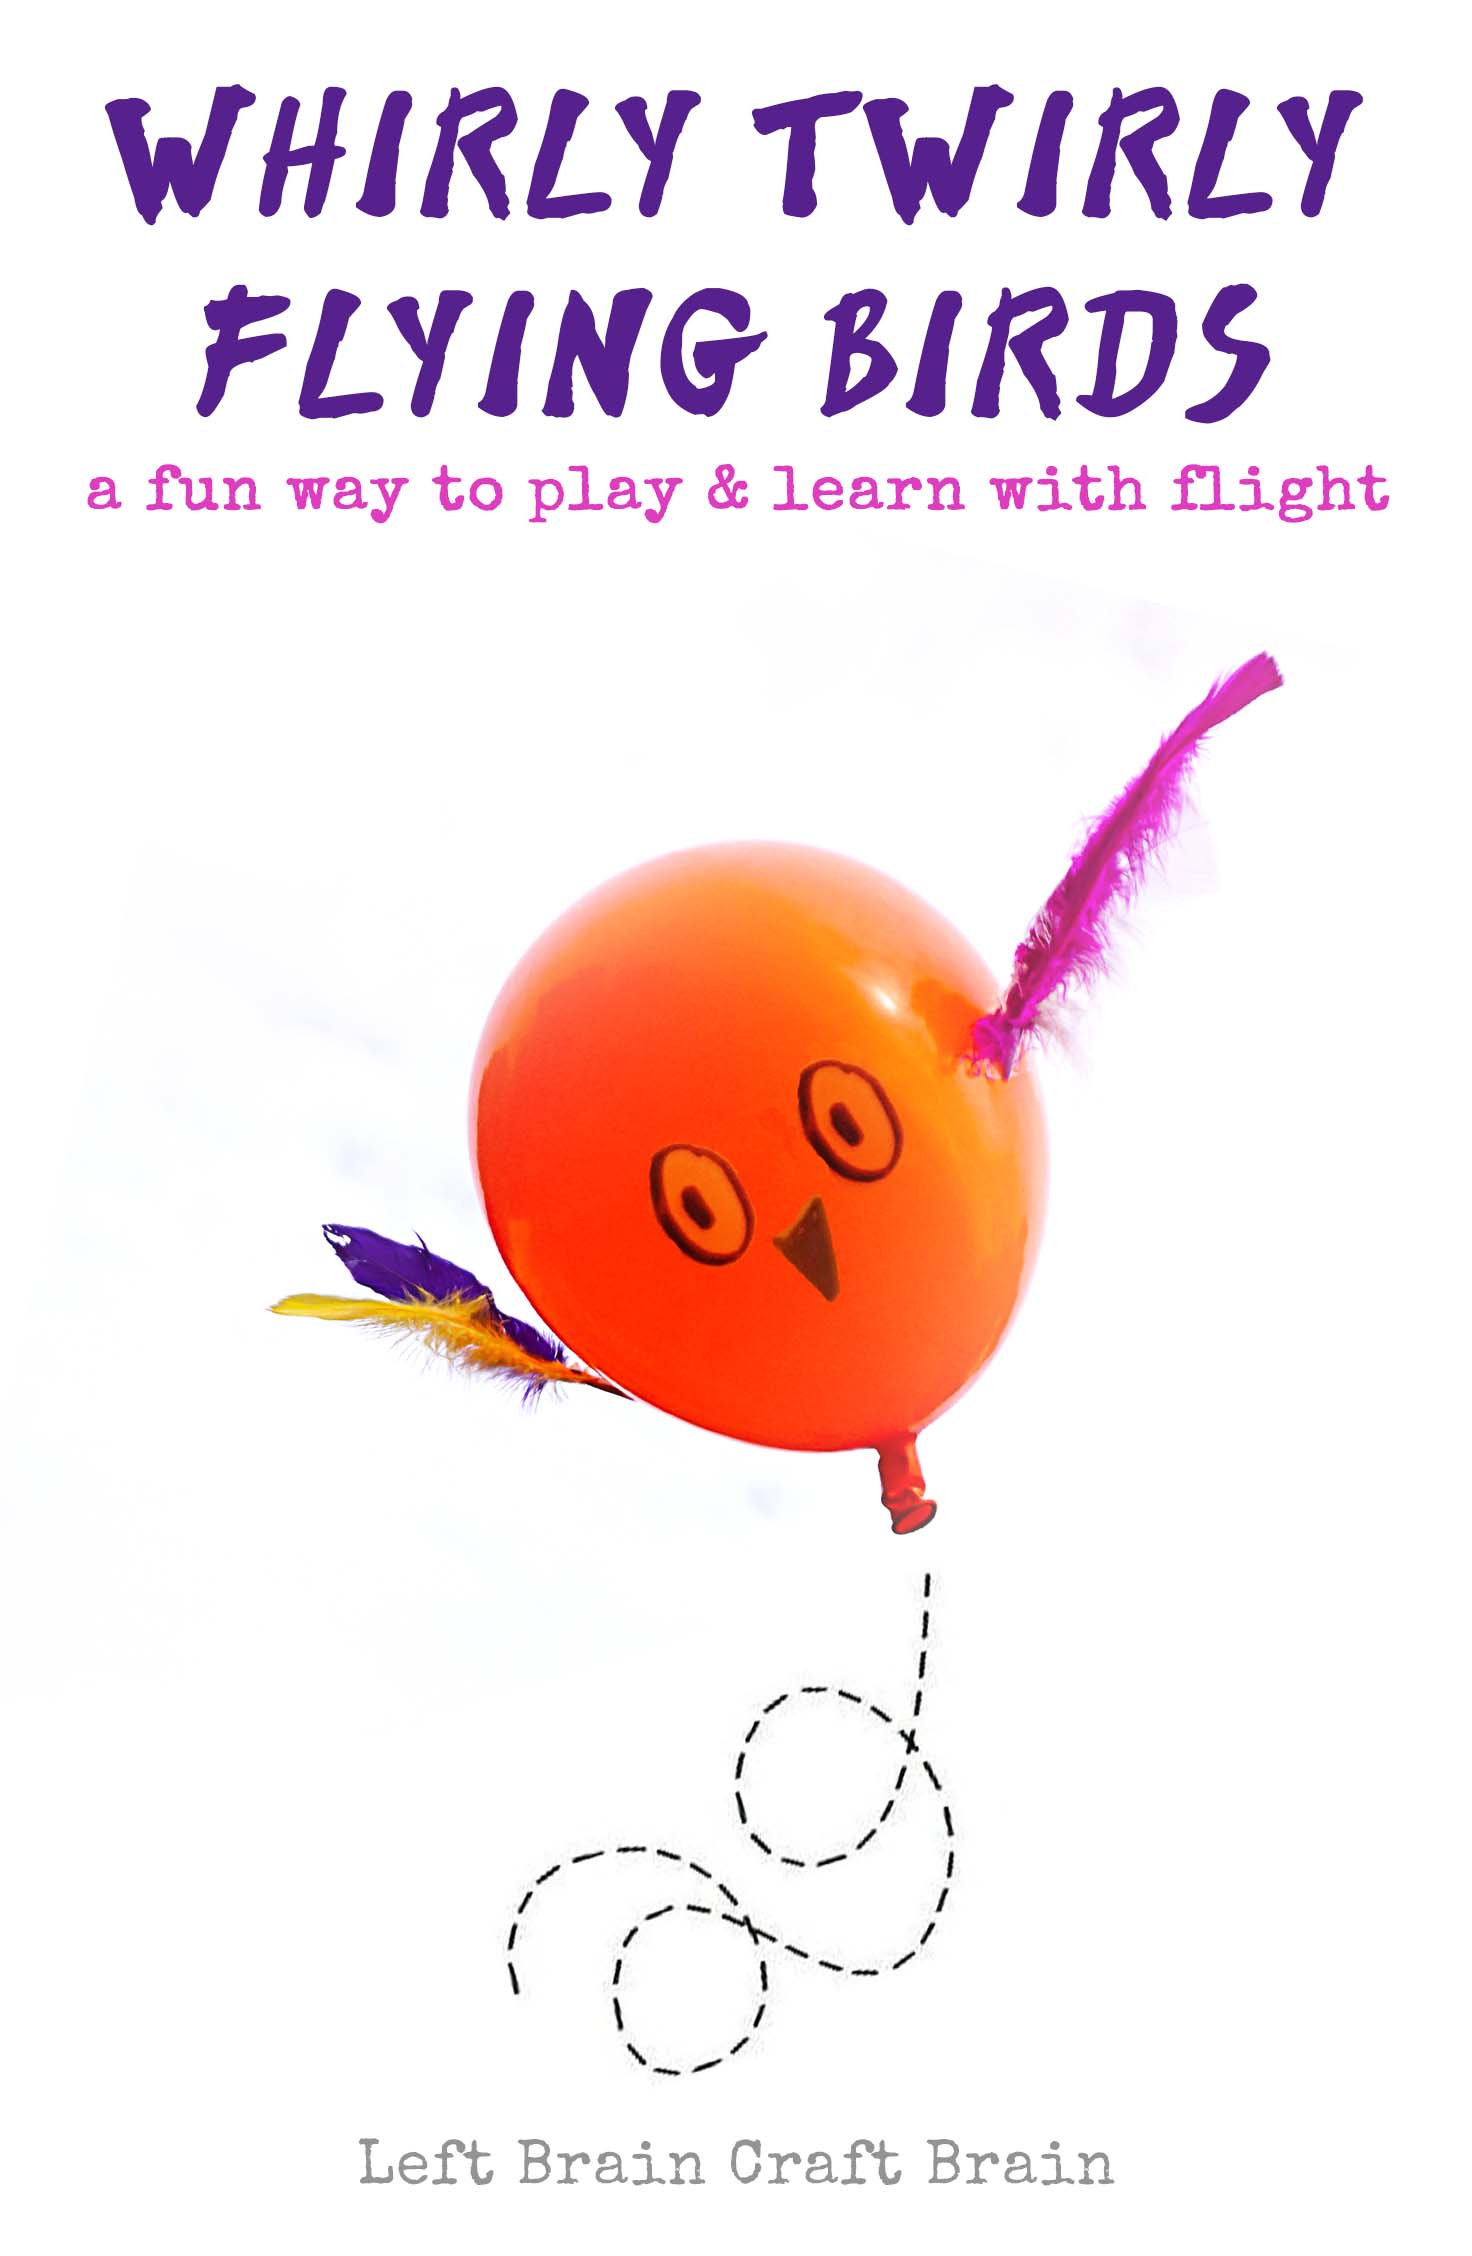 Learn what makes flying birds fly with this fun balloon activity for kids. It's an easy to do activity perfect for STEM / STEAM learning.